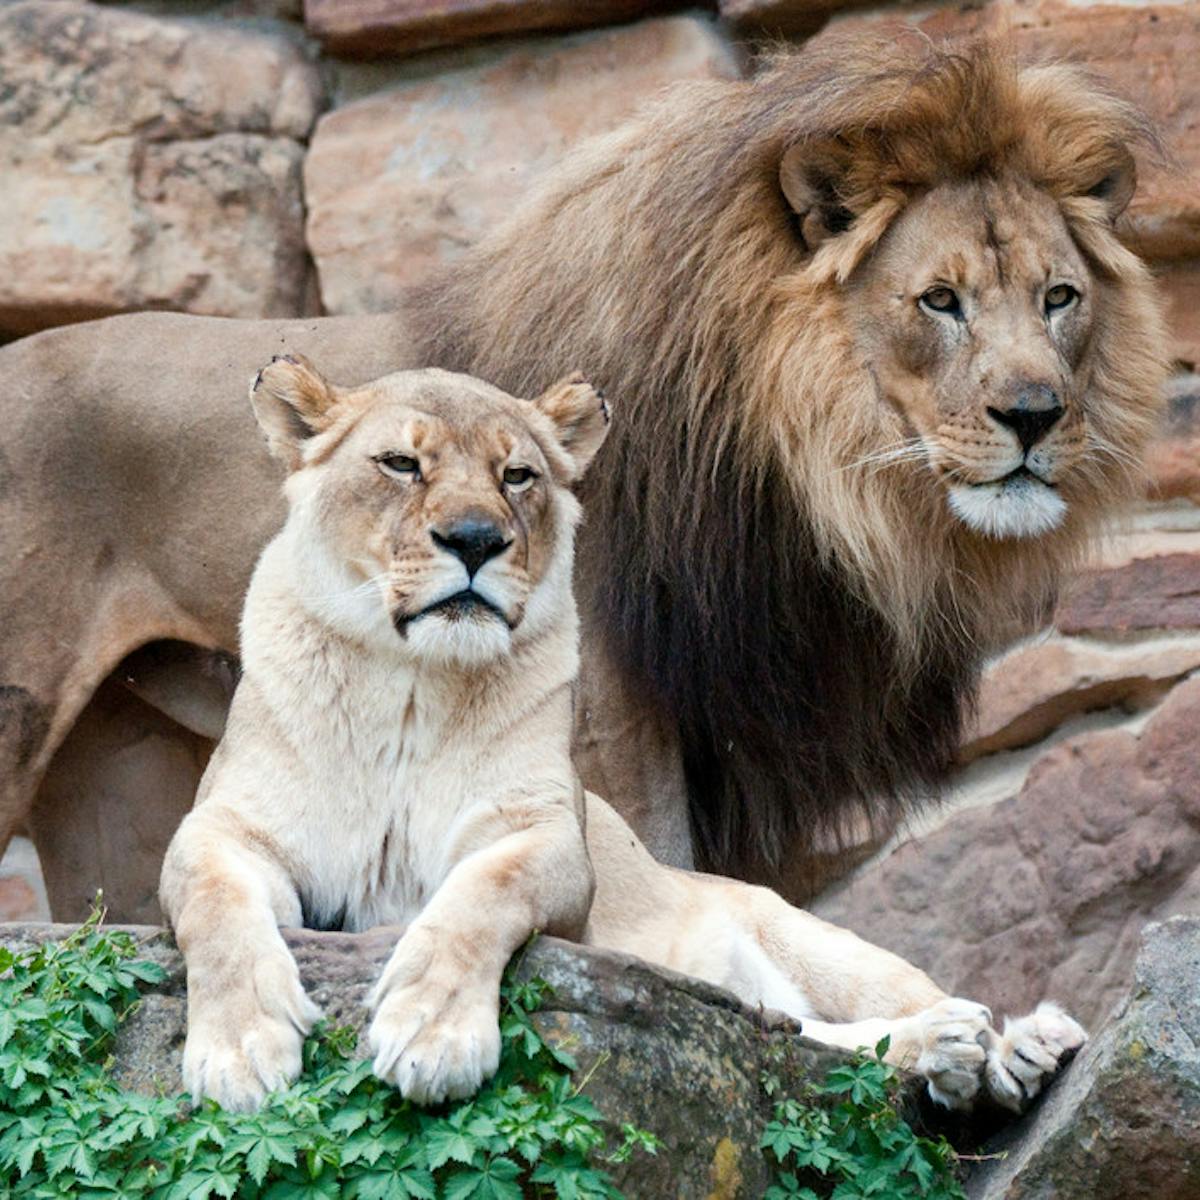 Curious Kids: 'I would like to know why man lions have manes and lady lions  don't'